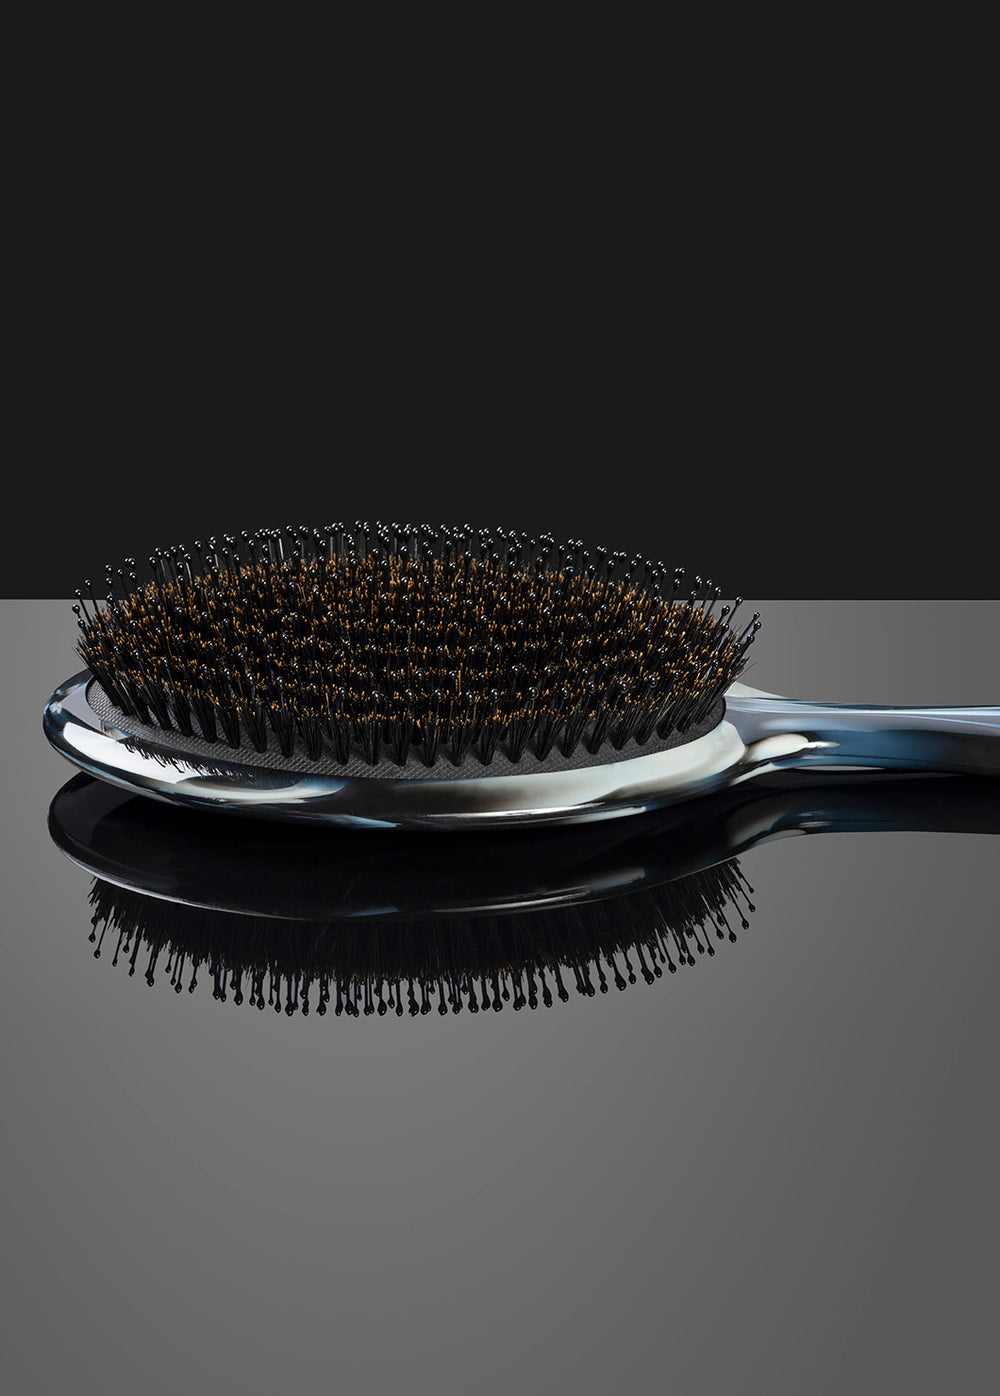 An Honest Review of Full Circle's Cast Iron Cleaning Brush